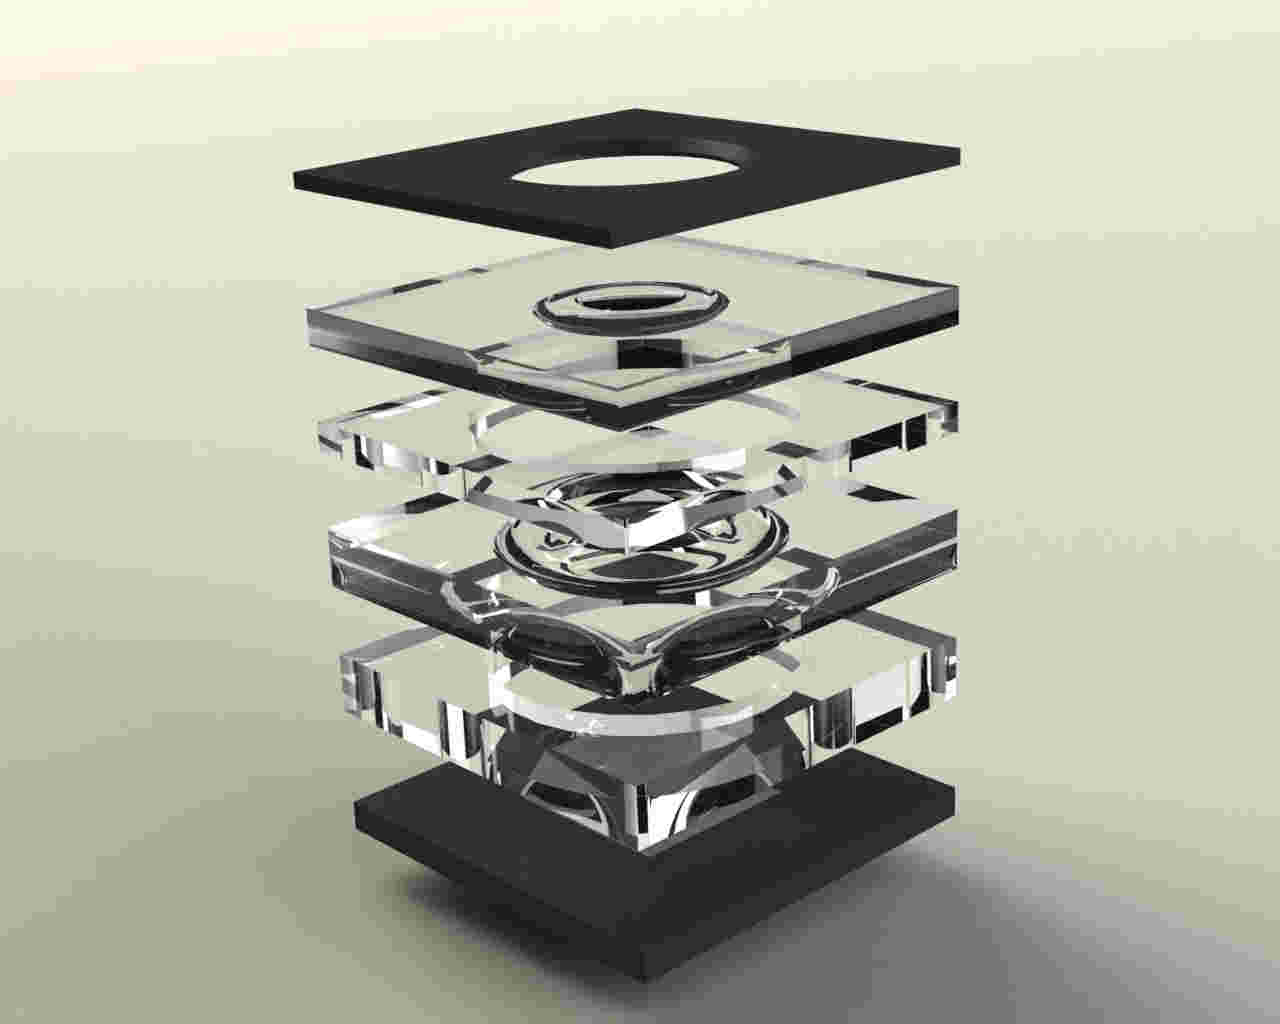 Elements of a typical wafer-level camera module include a CMOS image sensor, polymeric lenses molded onto glass carriers using UV imprint lithography, spacers and aperture layers, as shown in this exploded view.